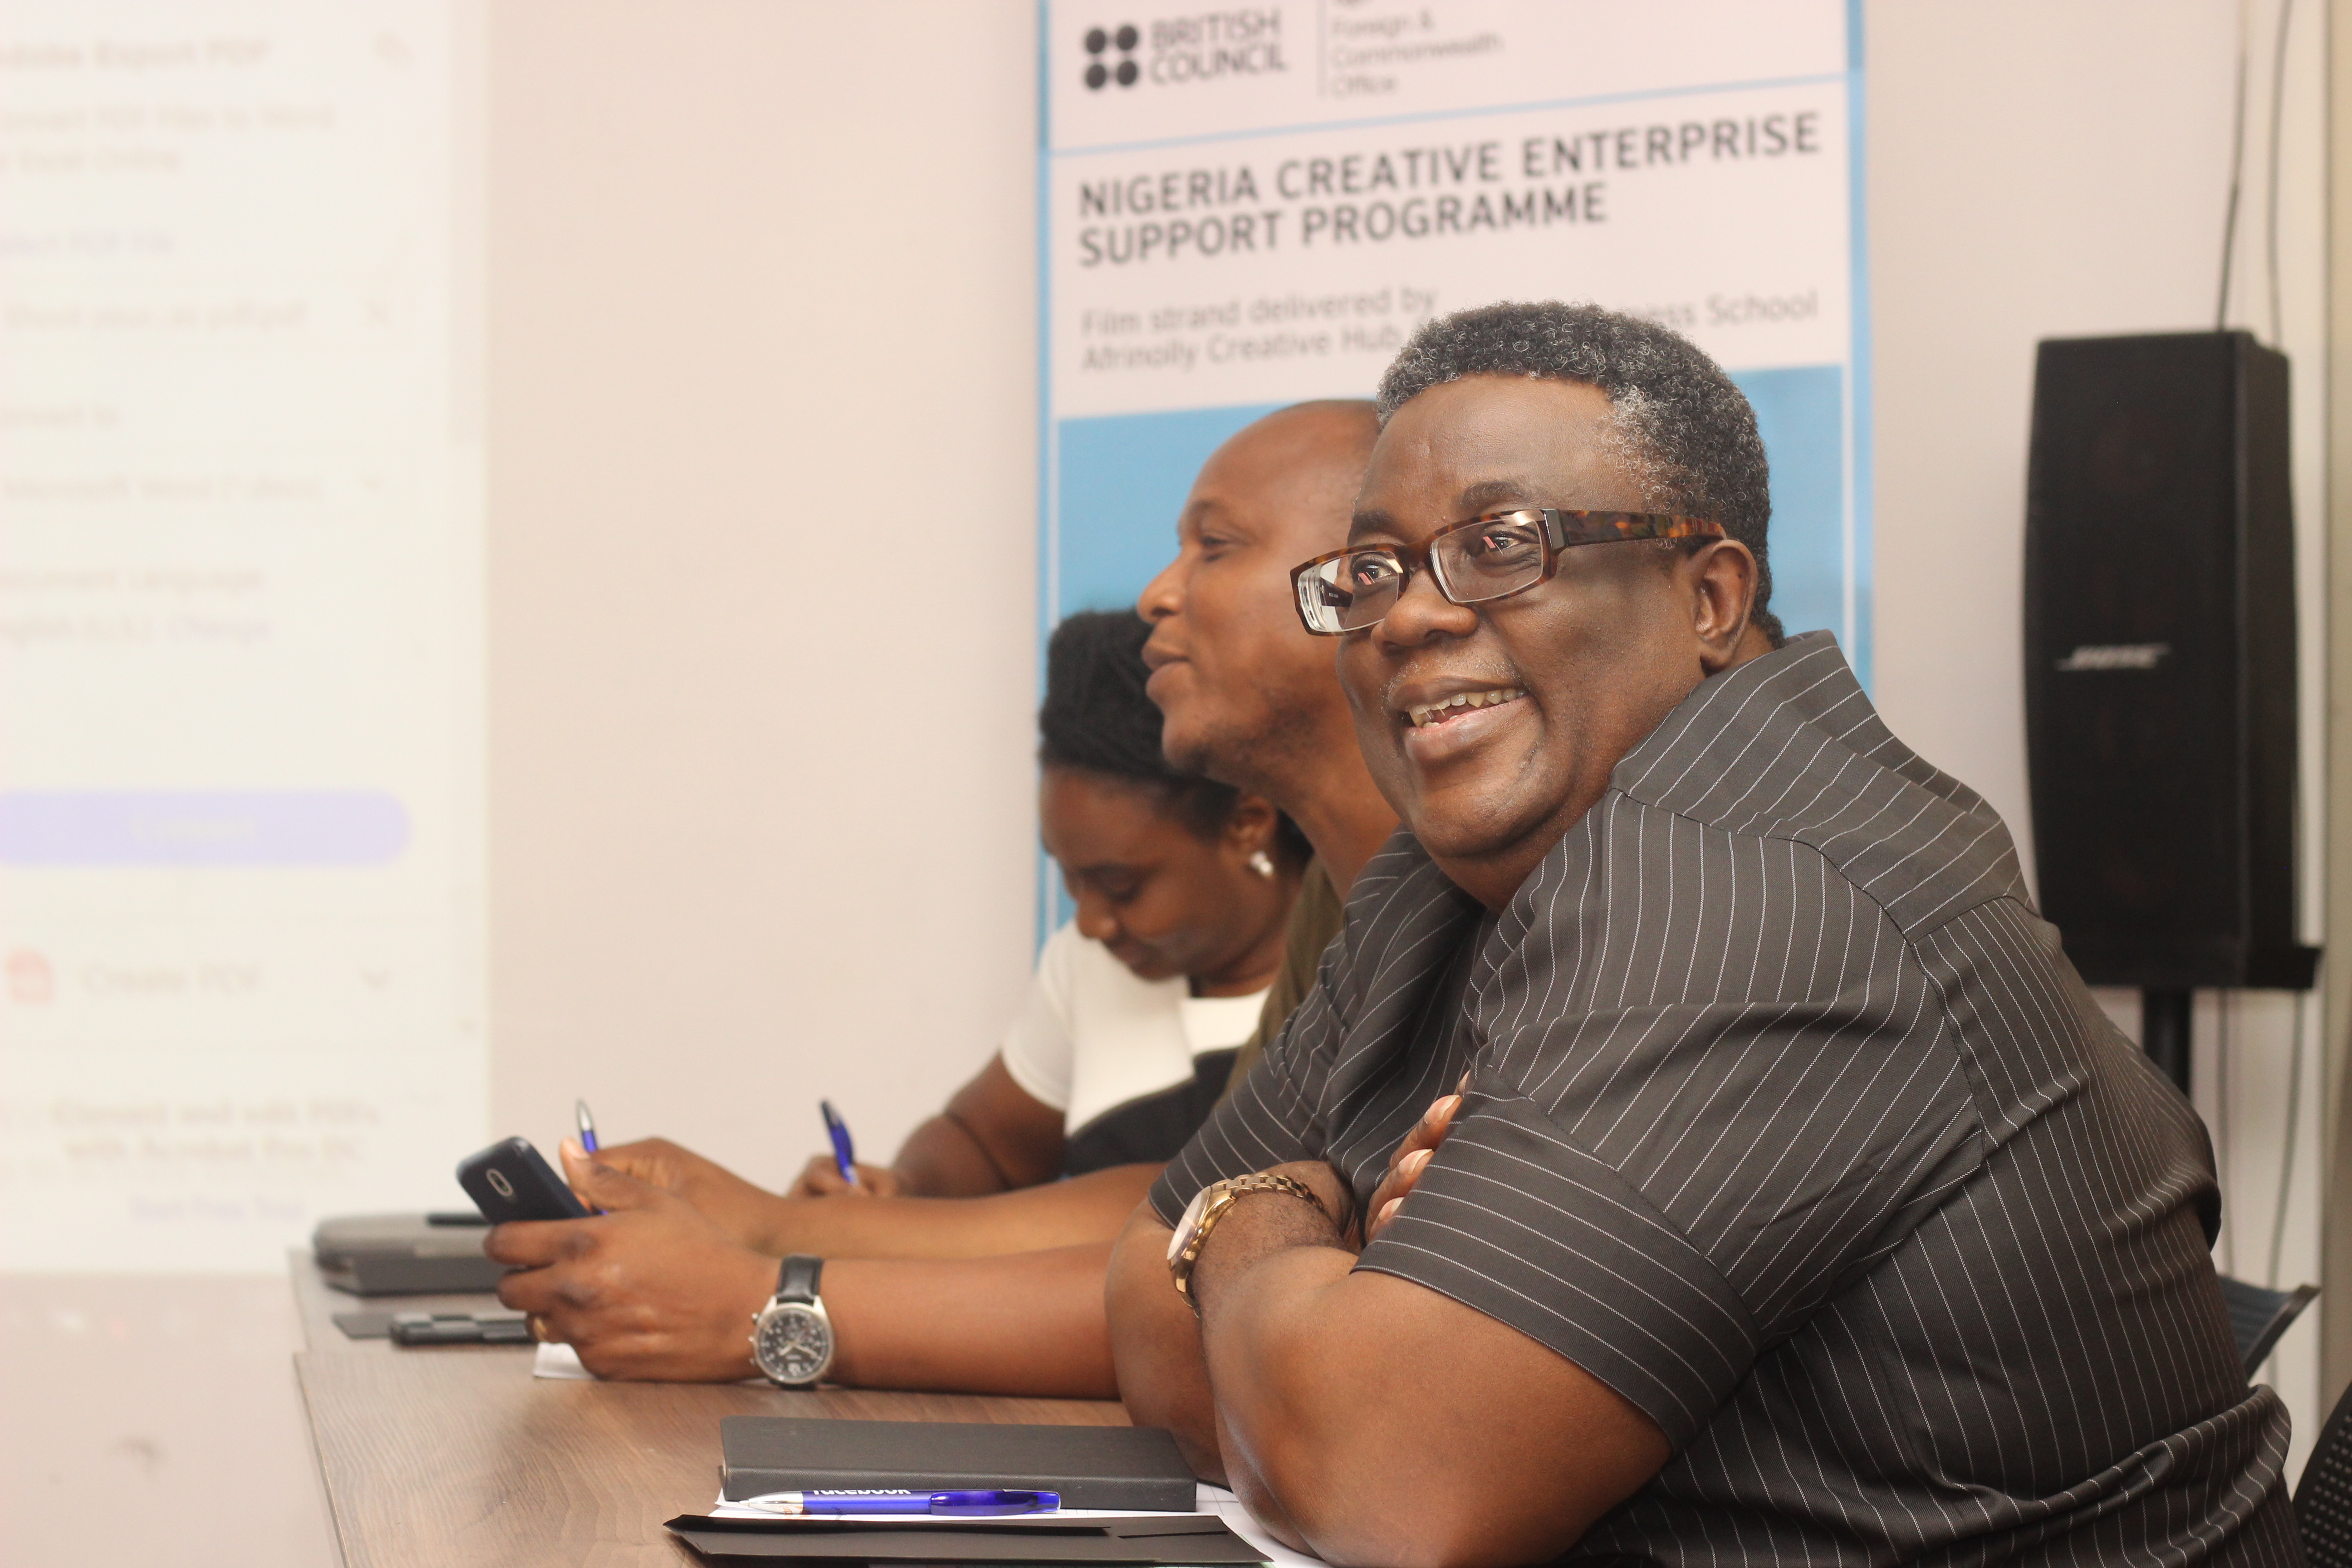 Entrepreneurs flaunt their creative prowess at the semi-final stage of the Nigeria Creative Enterprise Support Programme